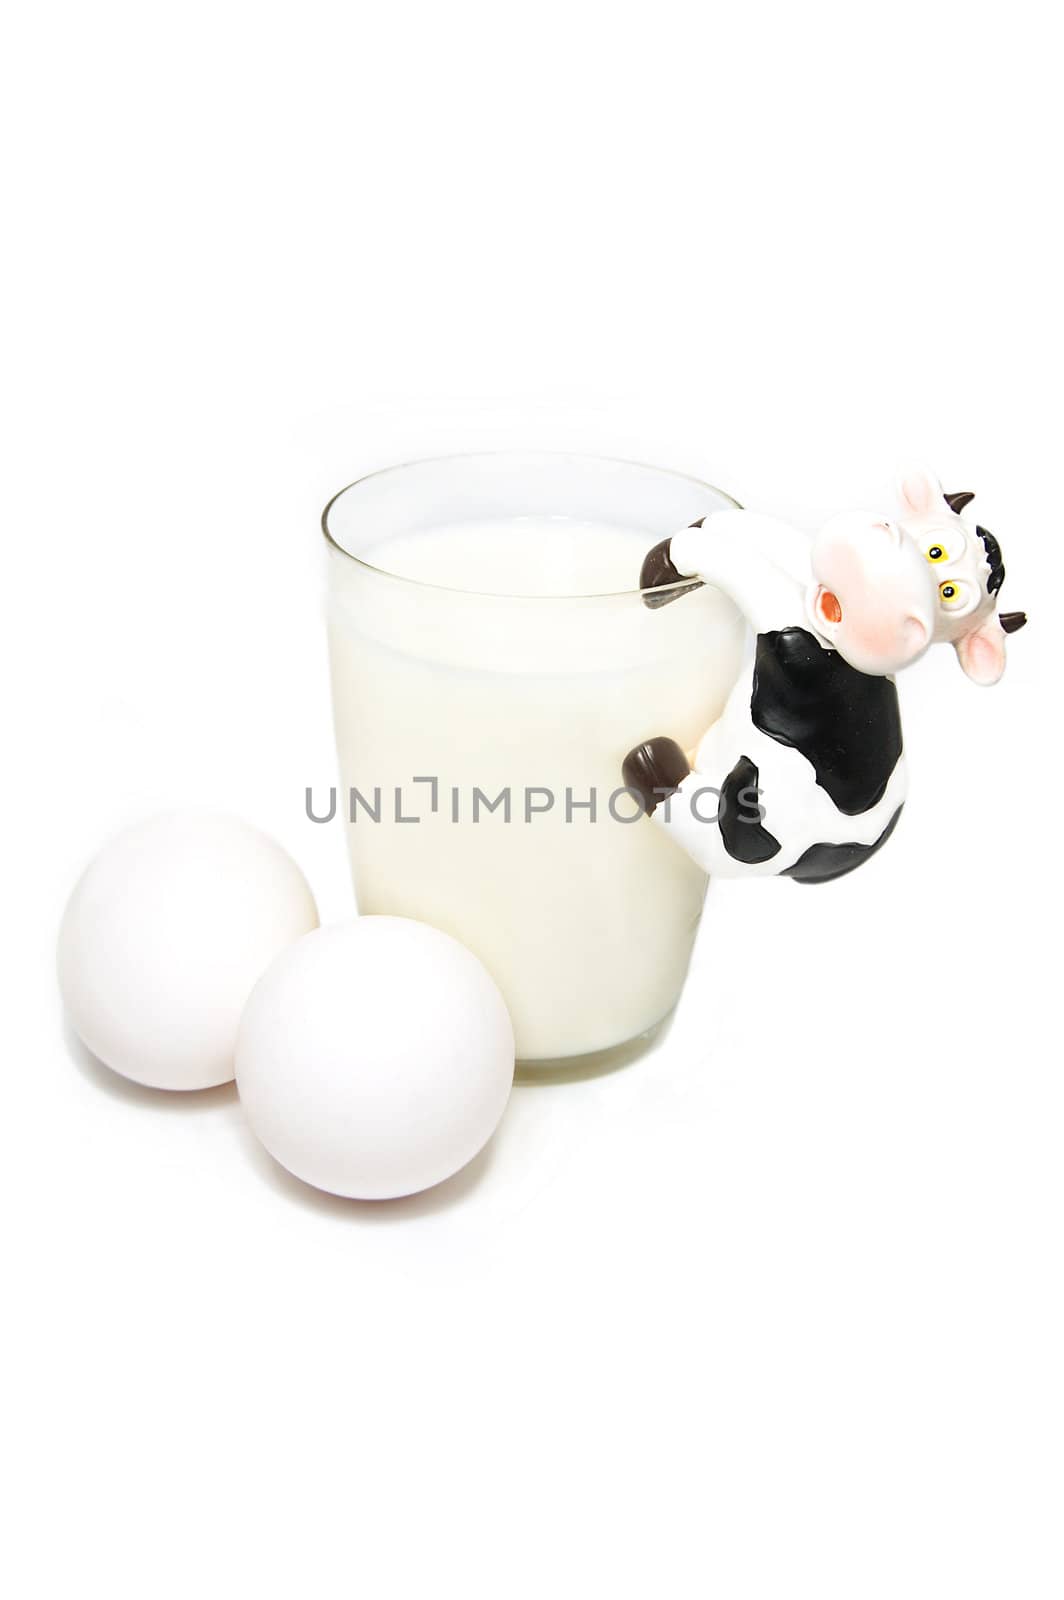 Glass of milk, eggs and funny toy cow